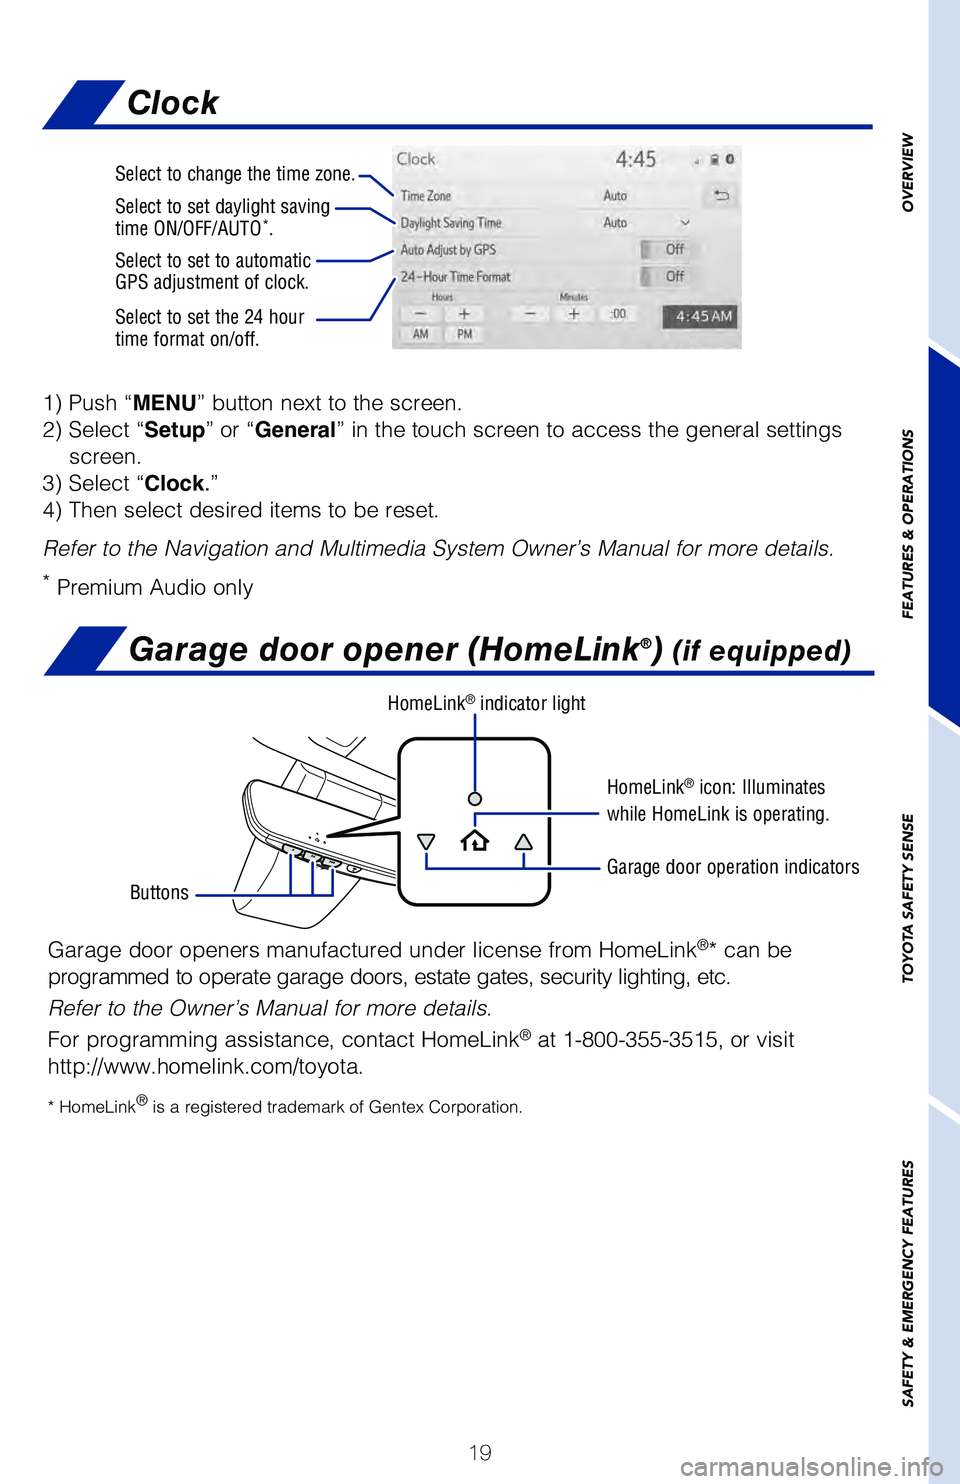 TOYOTA AVALON HYBRID 2021  Owners Manual (in English) 19
OVERVIEW
FEATURES & OPERATIONS
TOYOTA SAFETY SENSE
SAFETY & EMERGENCY FEATURES
Garage door openers manufactured under license from HomeLink®* can be 
programmed to operate garage doors, estate gat